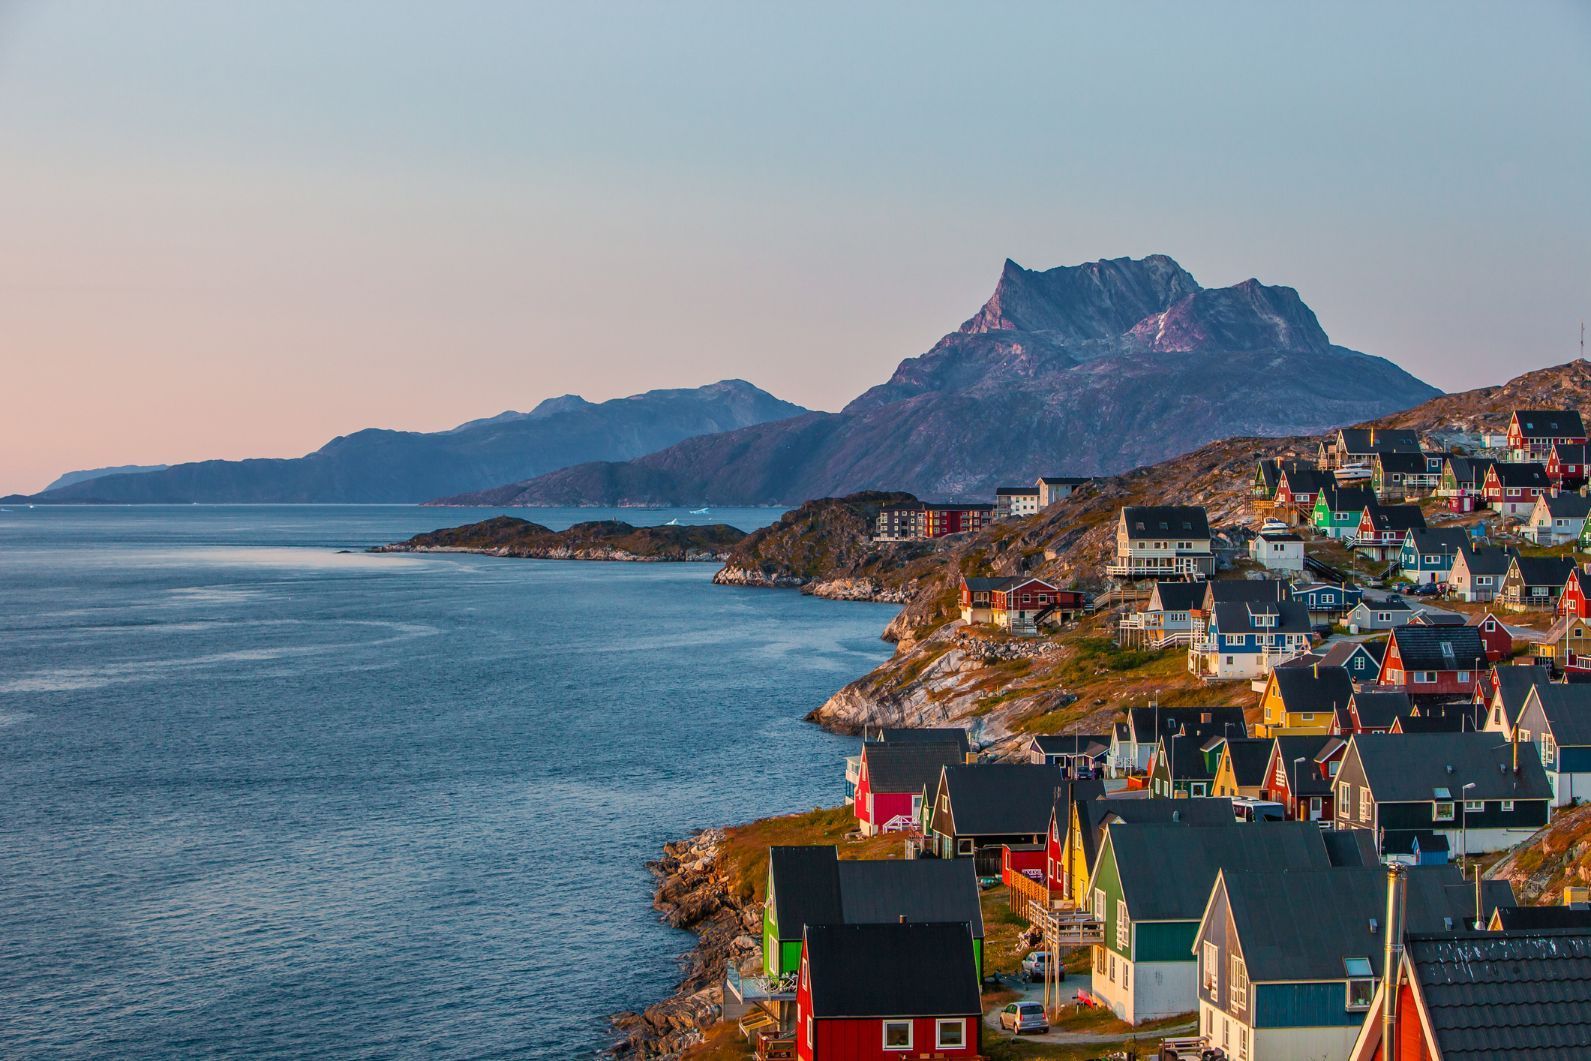 Colourful houses on the hillsides of Nuuk, the capital of Greenland. Photo: Getty